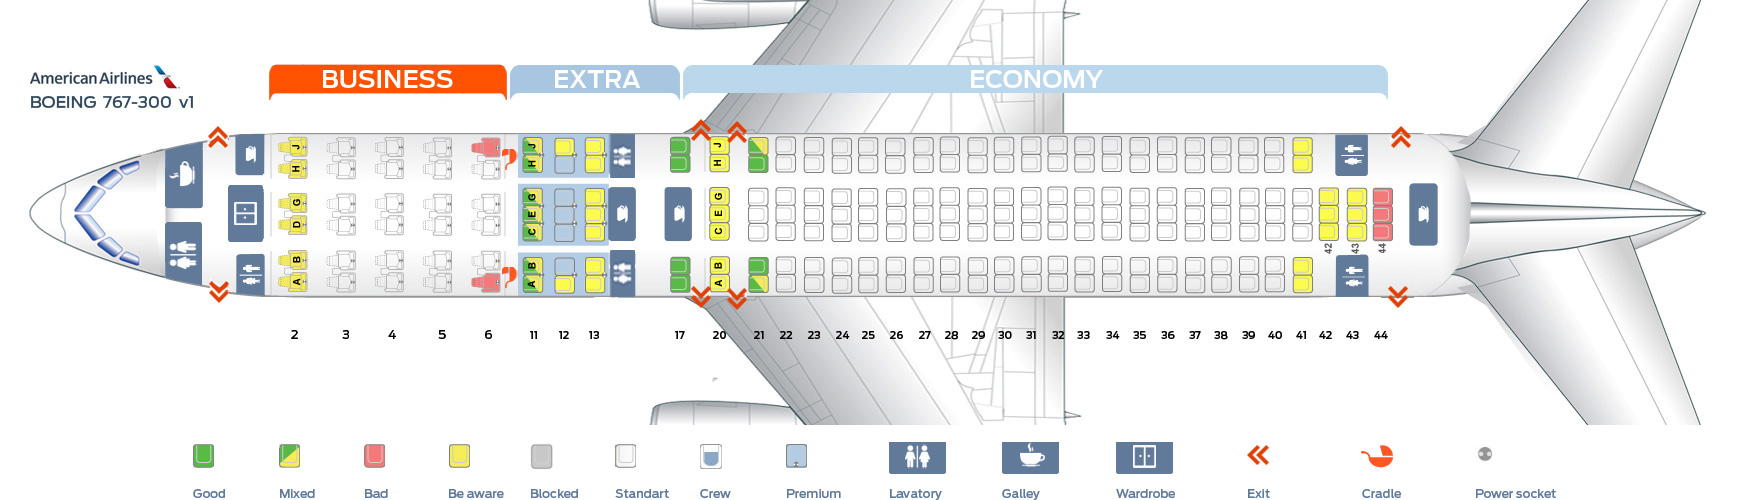 American Airlines Boeing 767 Seating Chart